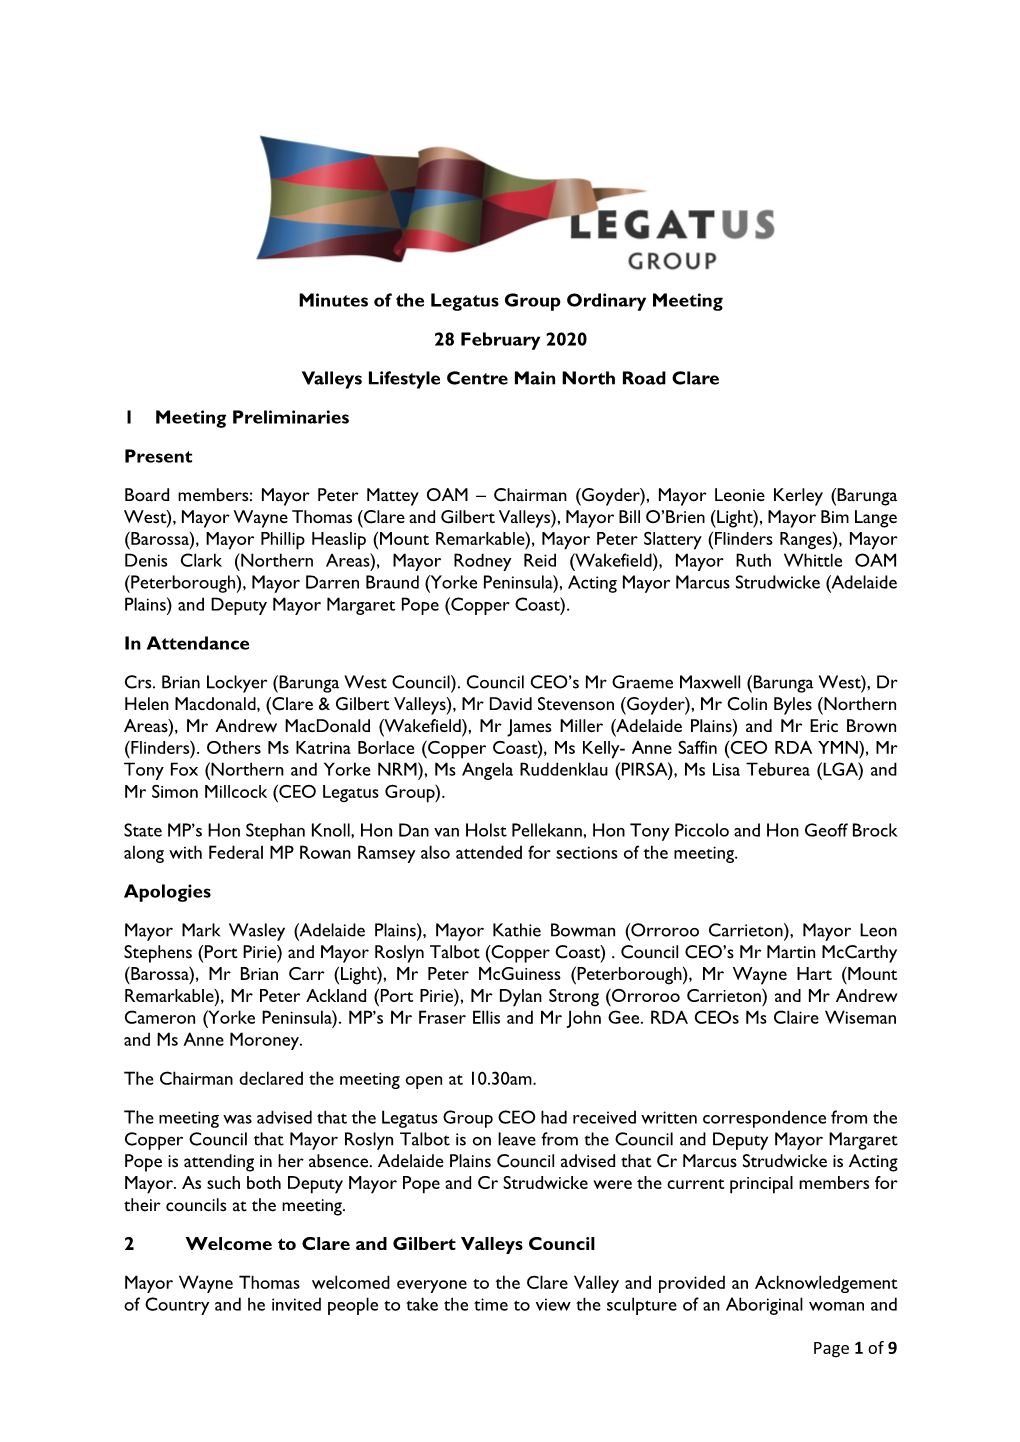 Page 1 of 9 Minutes of the Legatus Group Ordinary Meeting 28